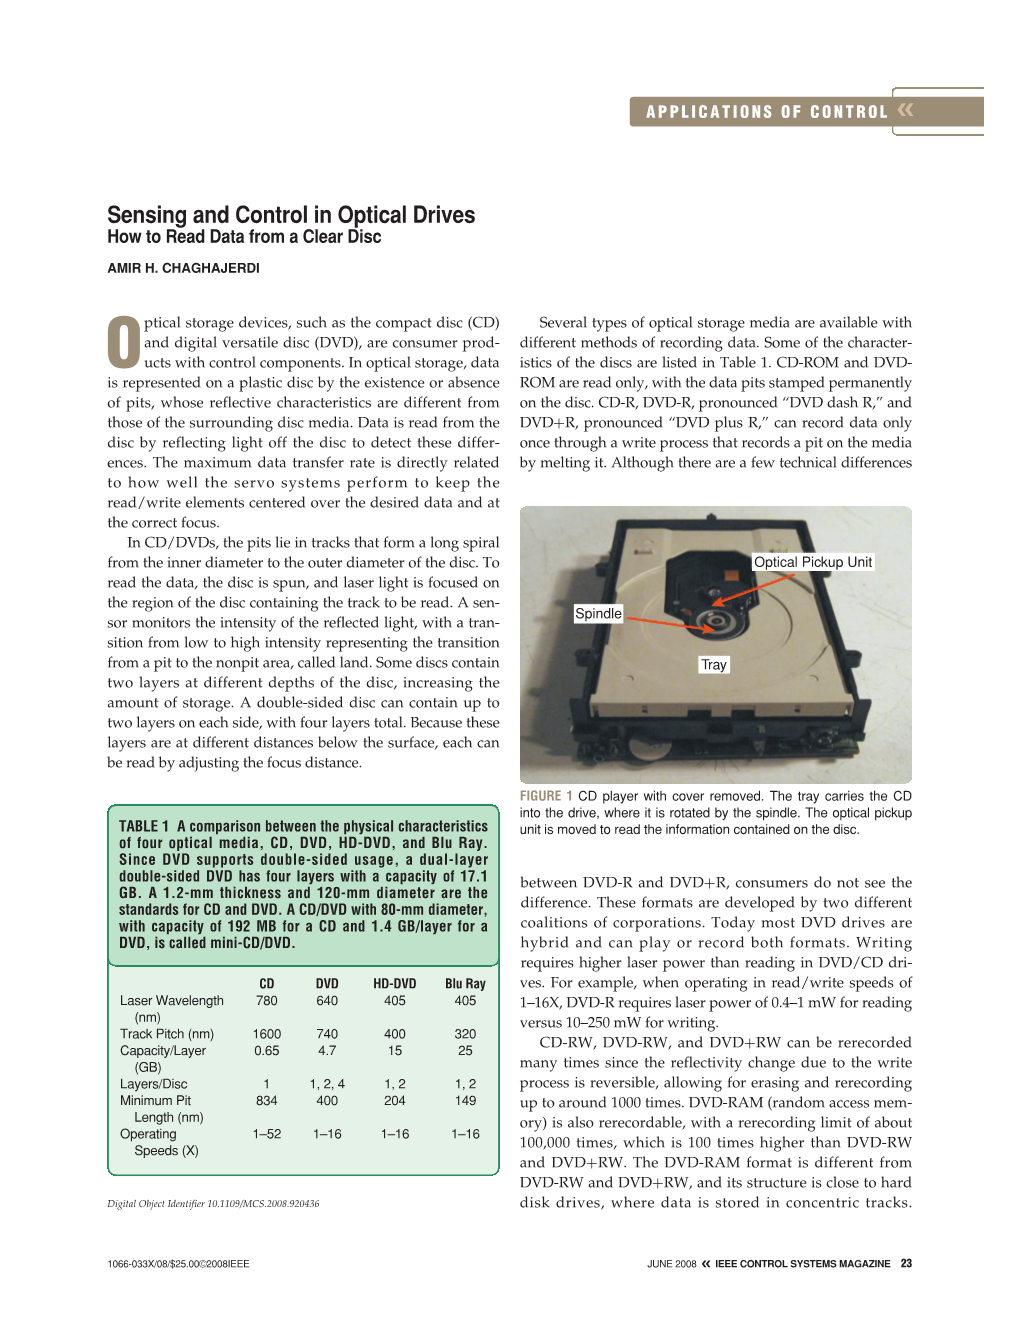 Sensing and Control in Optical Drives – How to Read Data from a Clear Disc